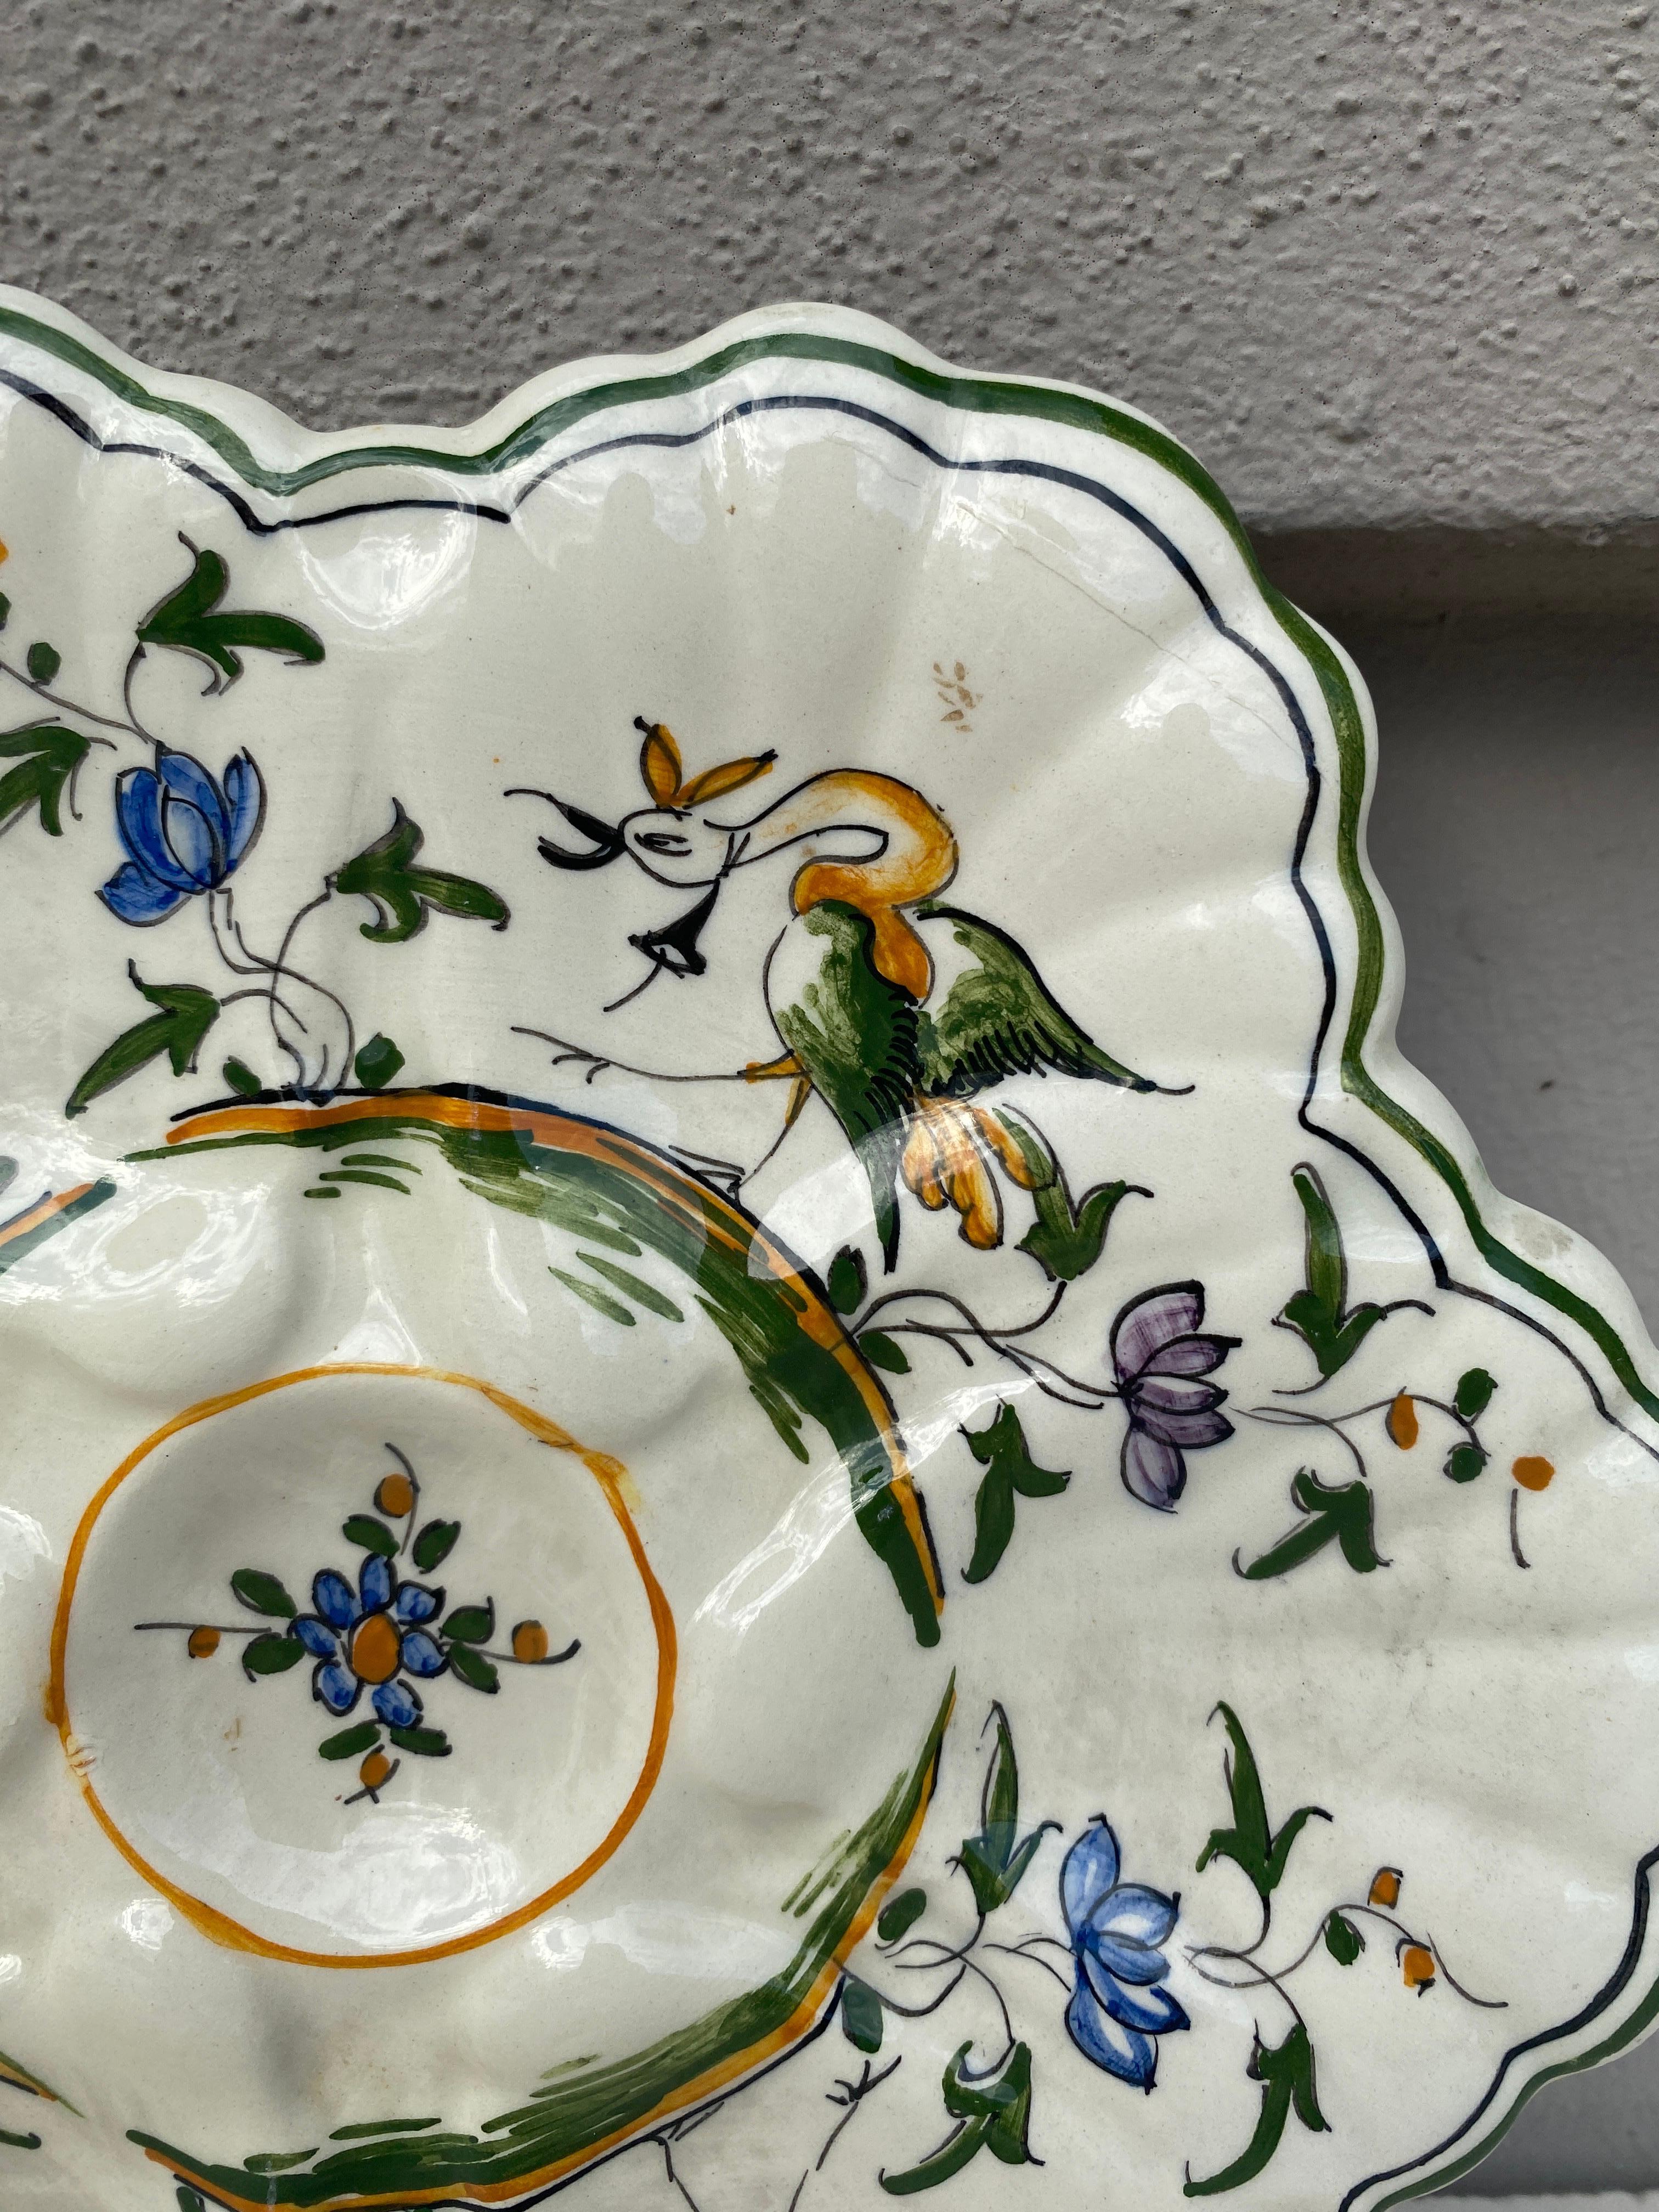 French Faience rustic oyster plate Moustiers style, circa 1940.
Painting of birds and flowers.